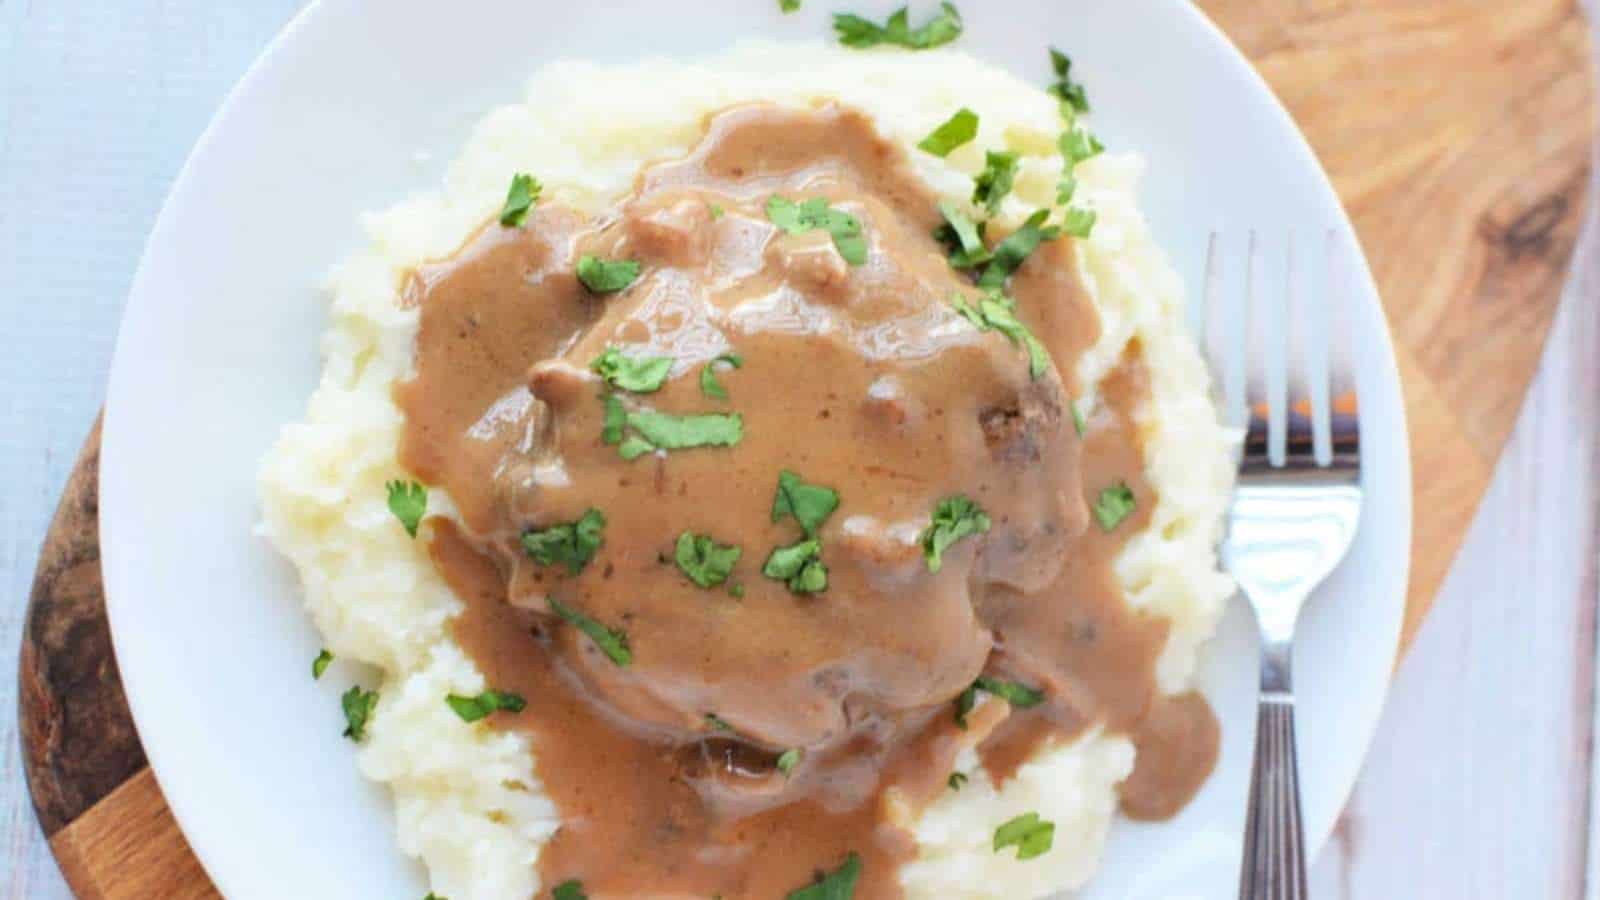 A plate with mashed potatoes and gravy on it.